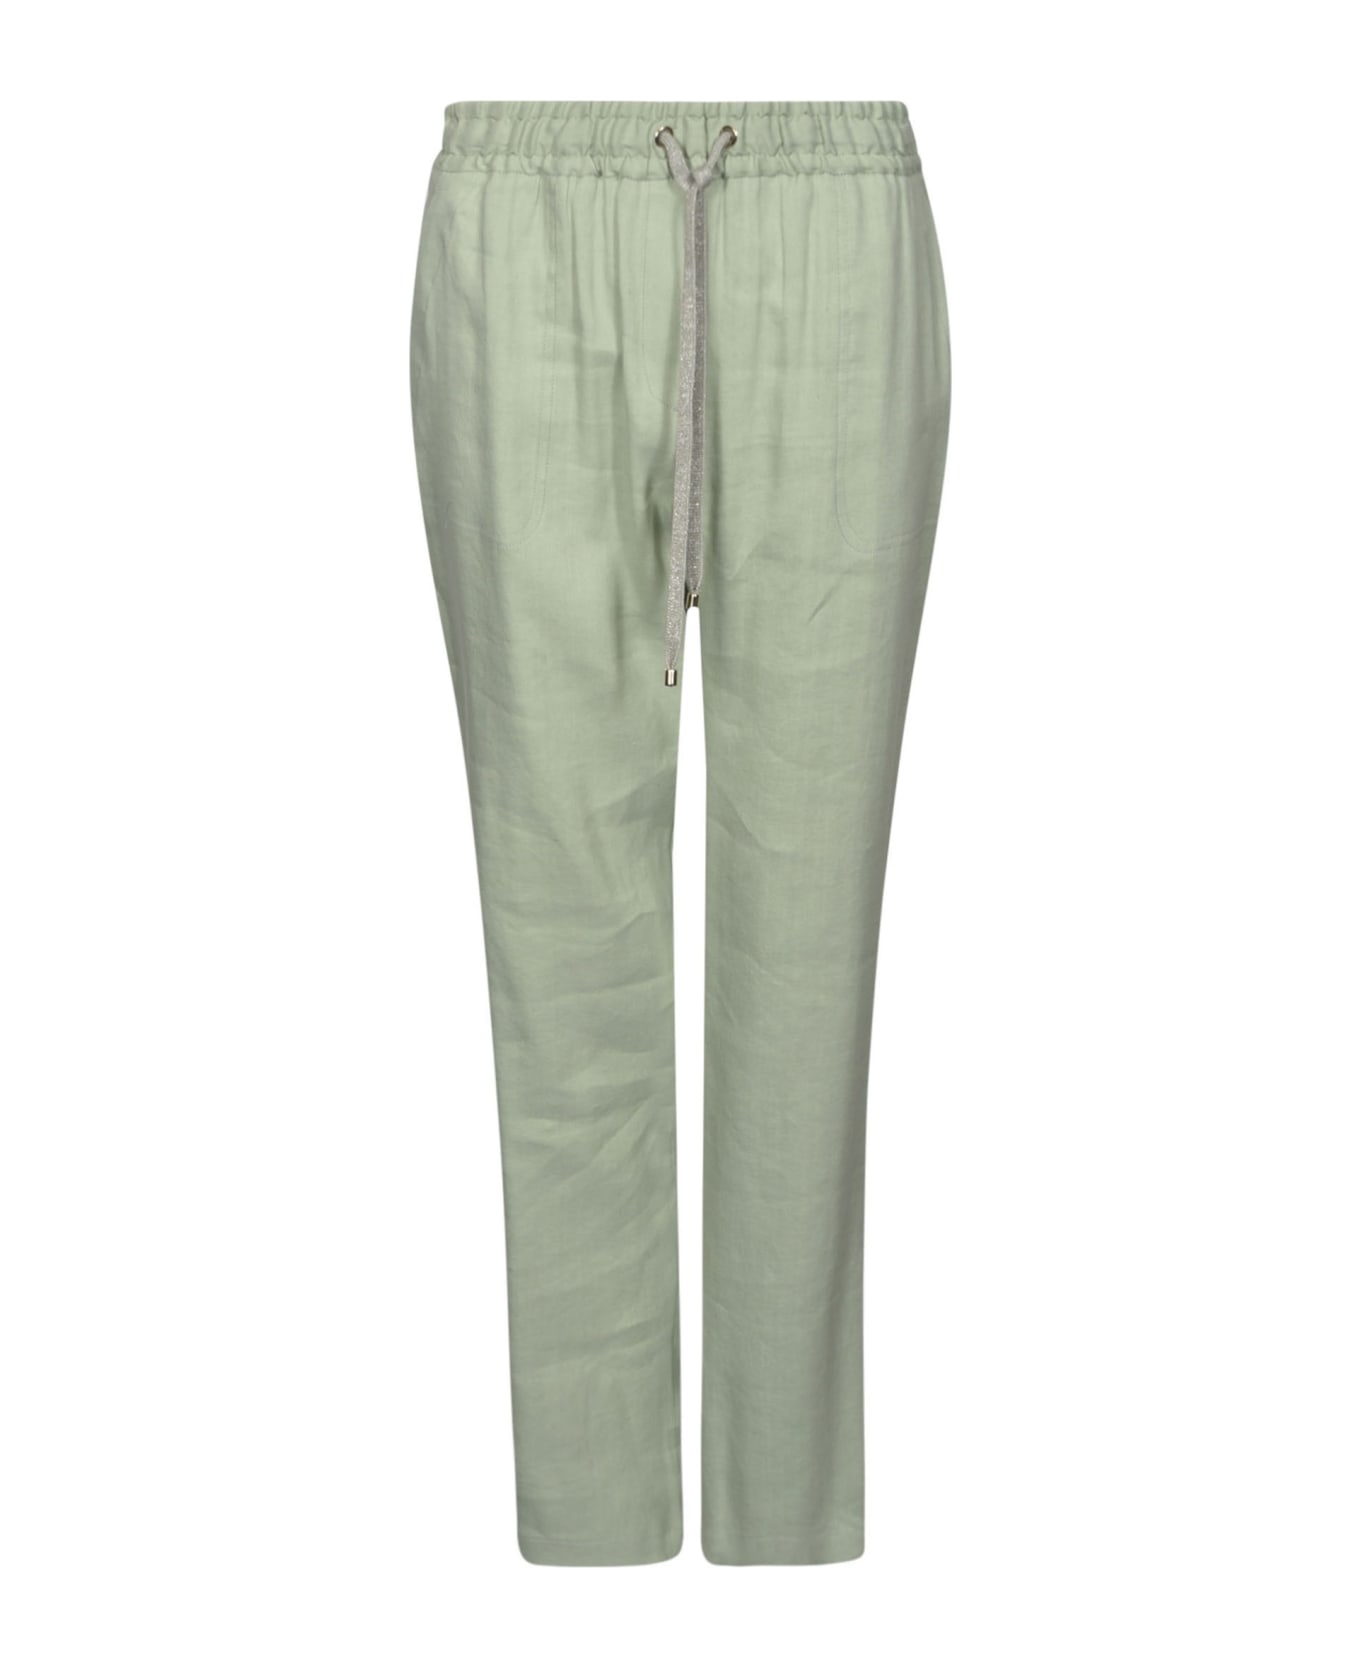 Lorena Antoniazzi Laced Ribbed Trousers - Green ボトムス